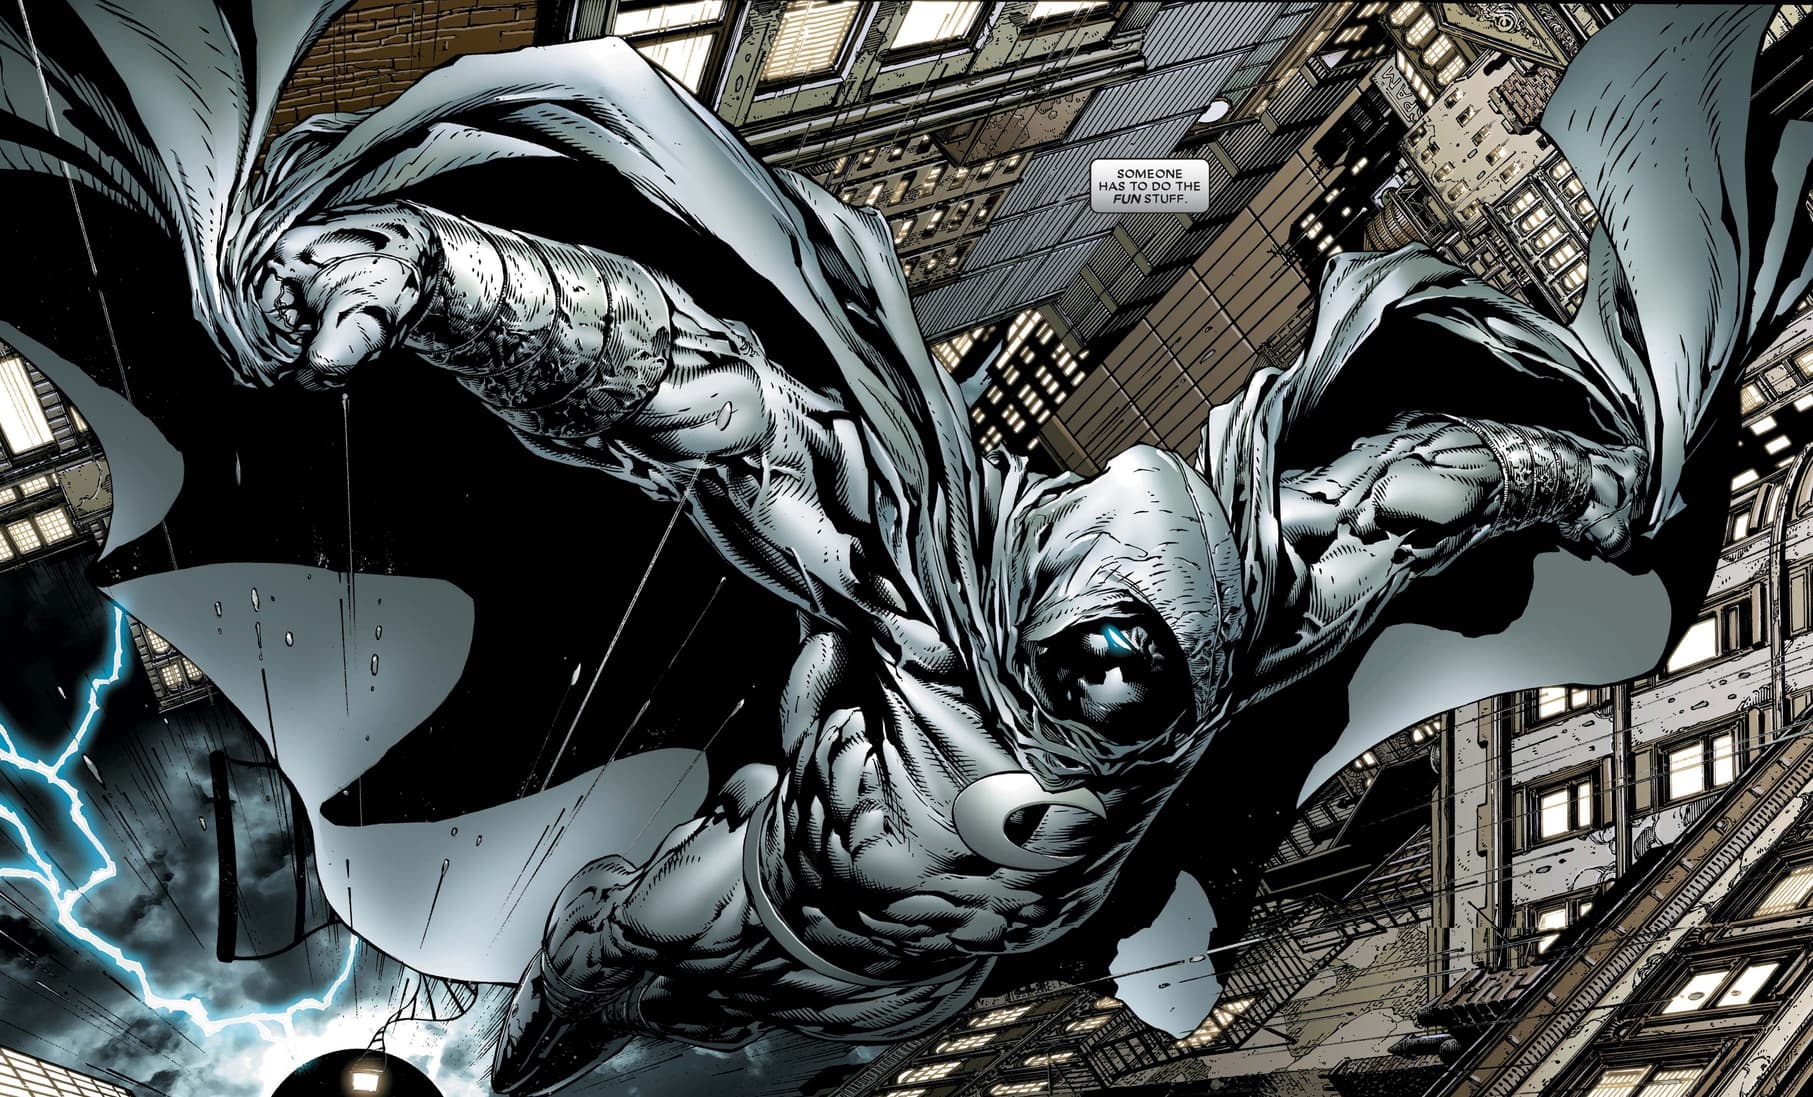 MOON KNIGHT (2006) #1 by Charlie Huston and David Finch.